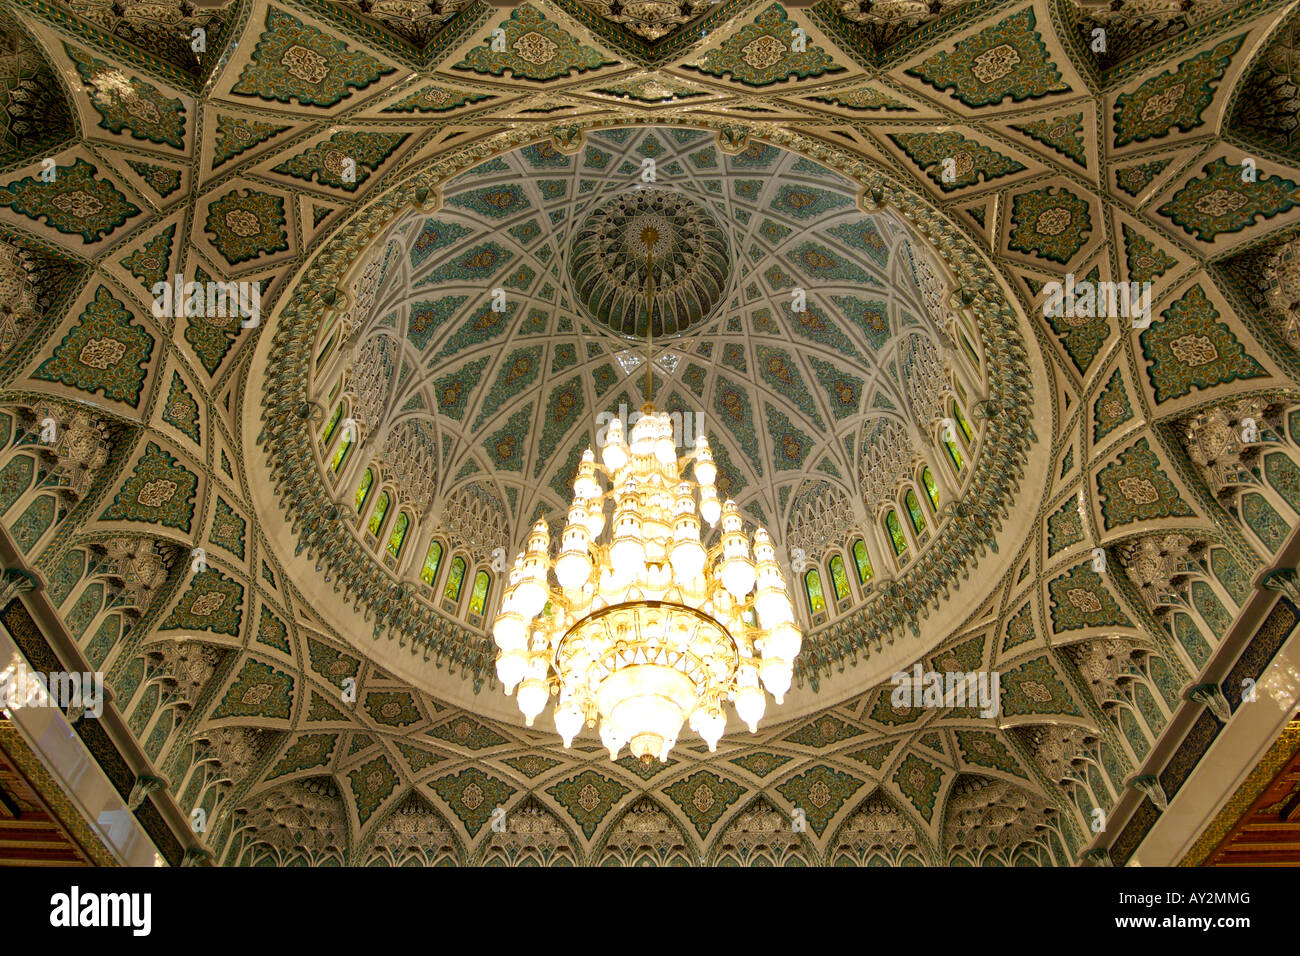 Chandelier and interior of the dome over the prayer area of the Sultan Qaboos Grand Mosque in Muscat, the capital of Oman. Stock Photo